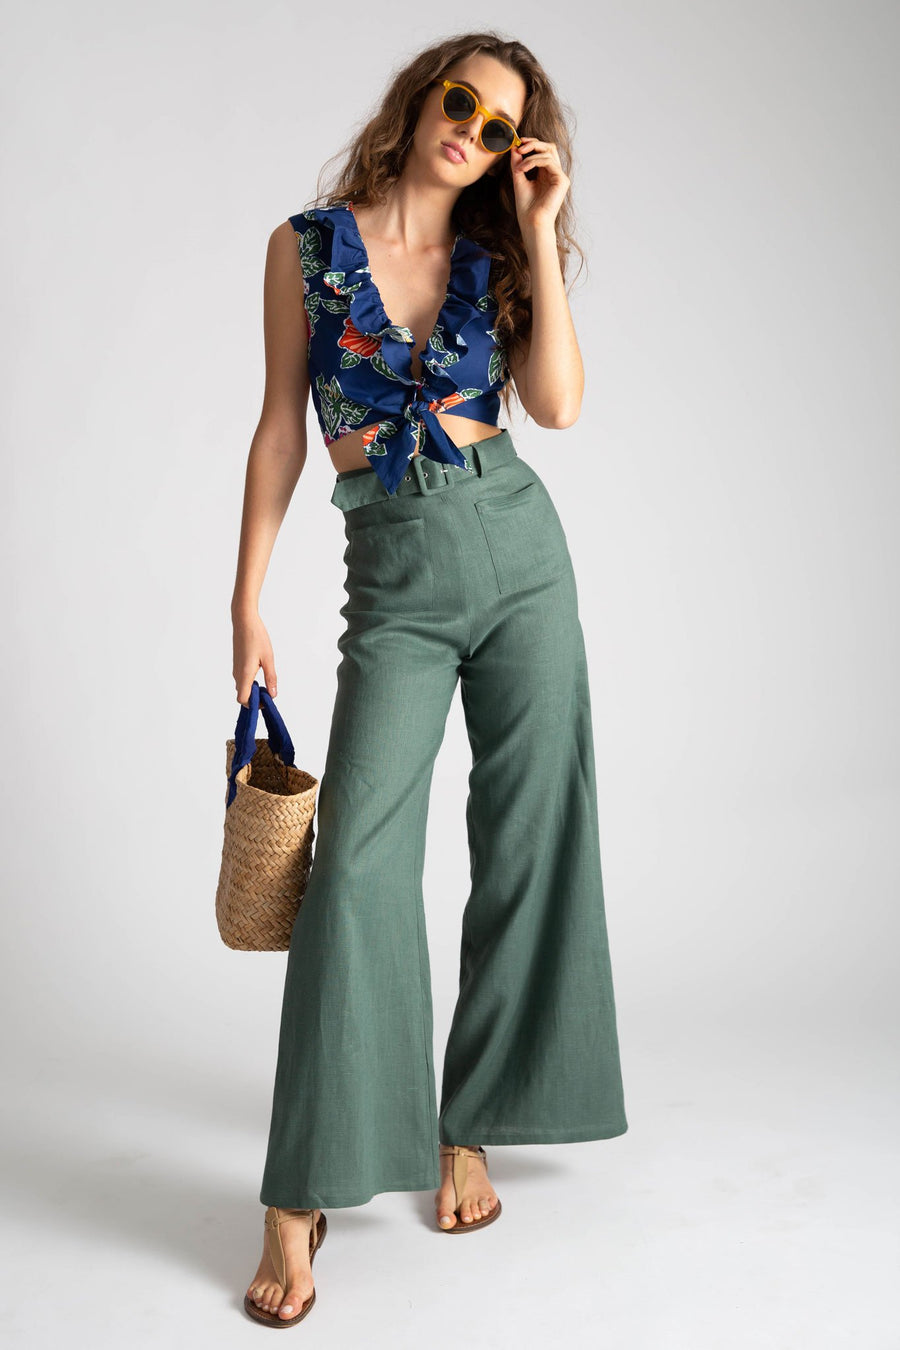 This is a photo of a woman wearing green linen high waisted flare pants with 2 front square pockets and a removable belt. She wears the pants with a floral tie crop top with front ruffle along the deep v neckline. The full look is styled with a natural colored straw bag and yellow sunglasses.